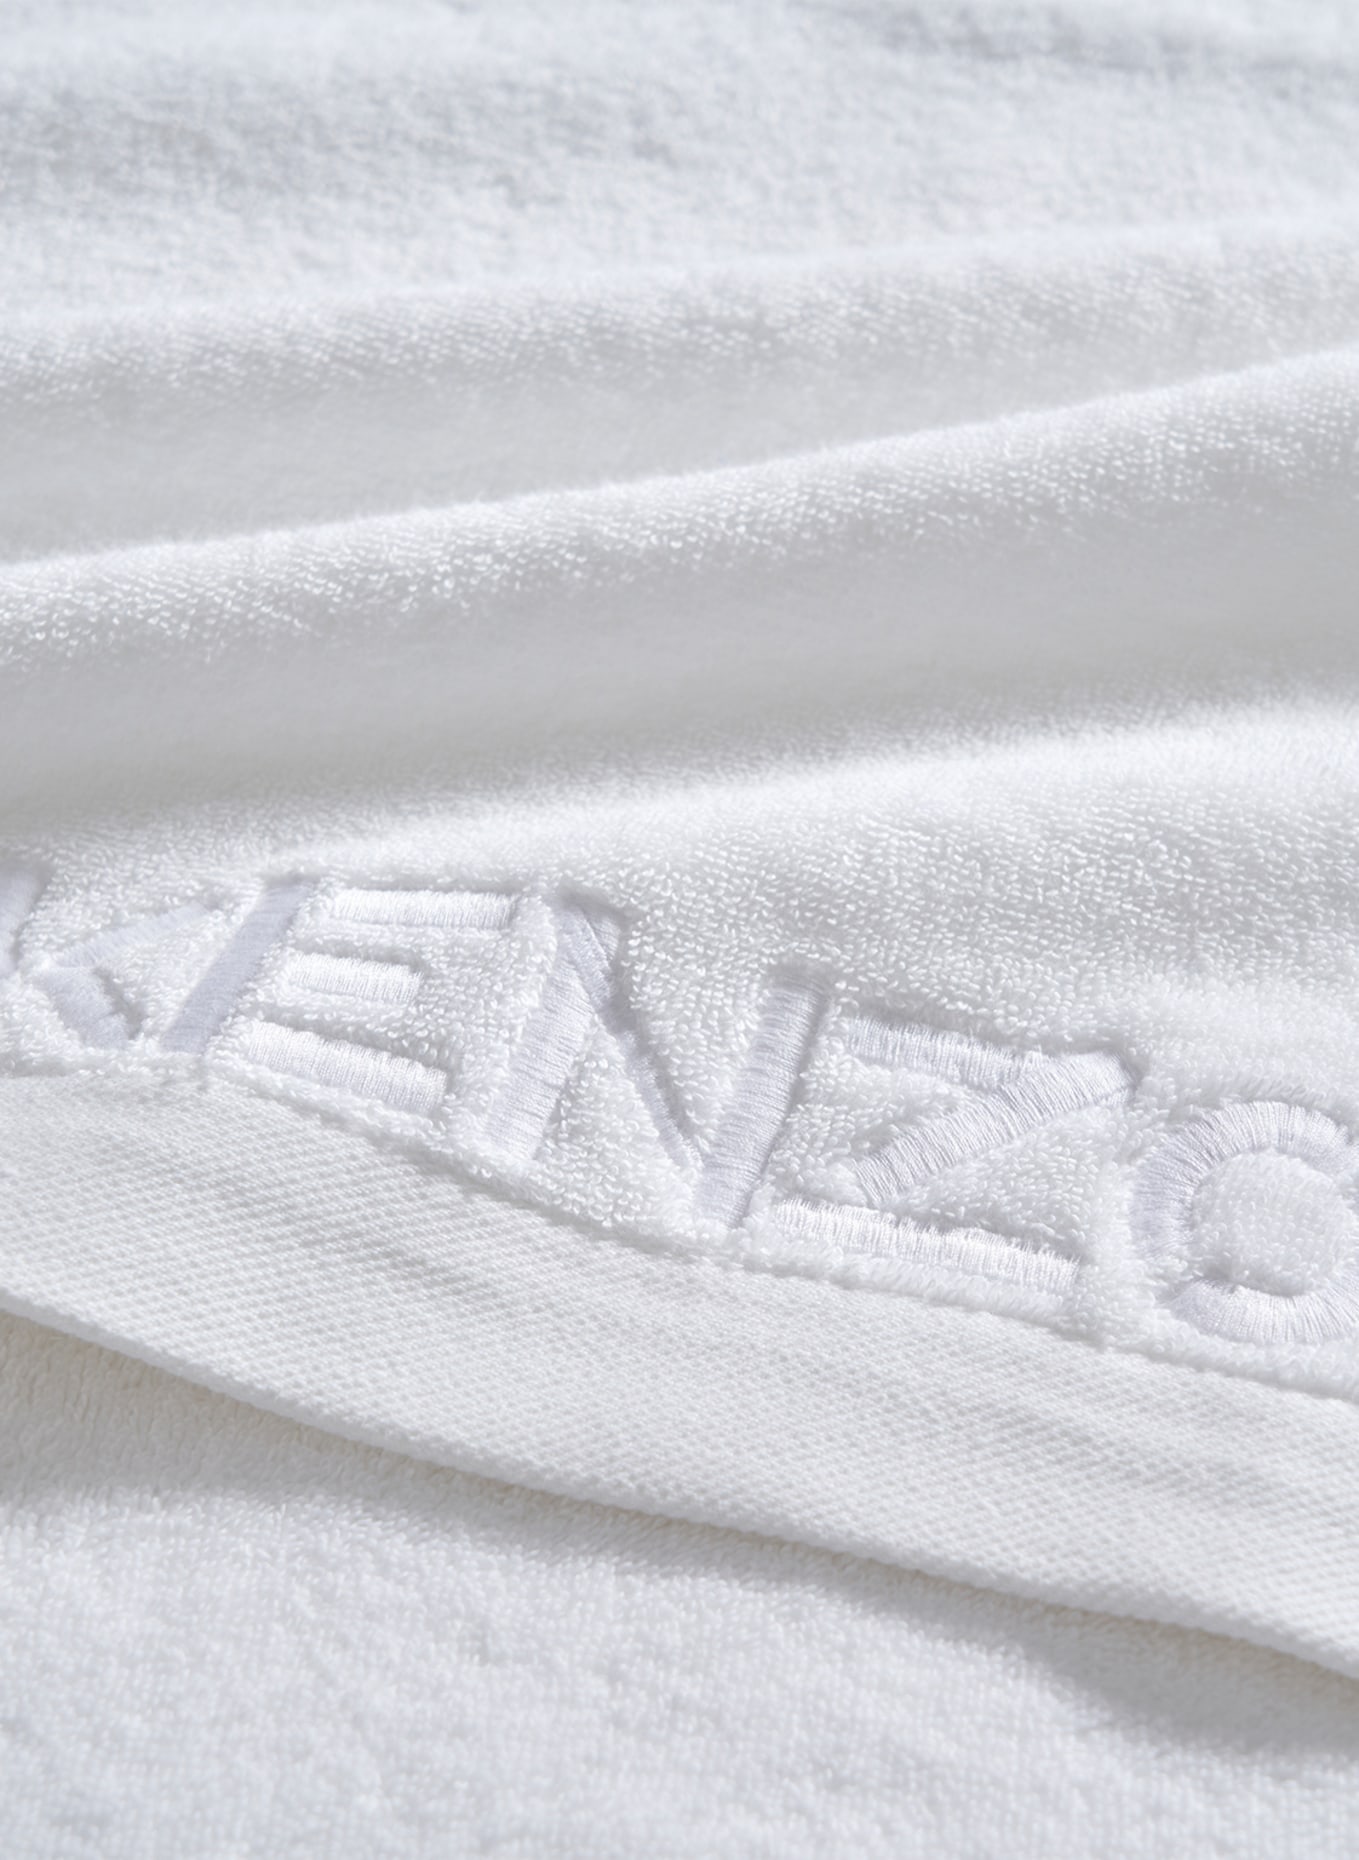 KENZO HOME Handtuch ICONIC, Farbe: WEISS (Bild 10)